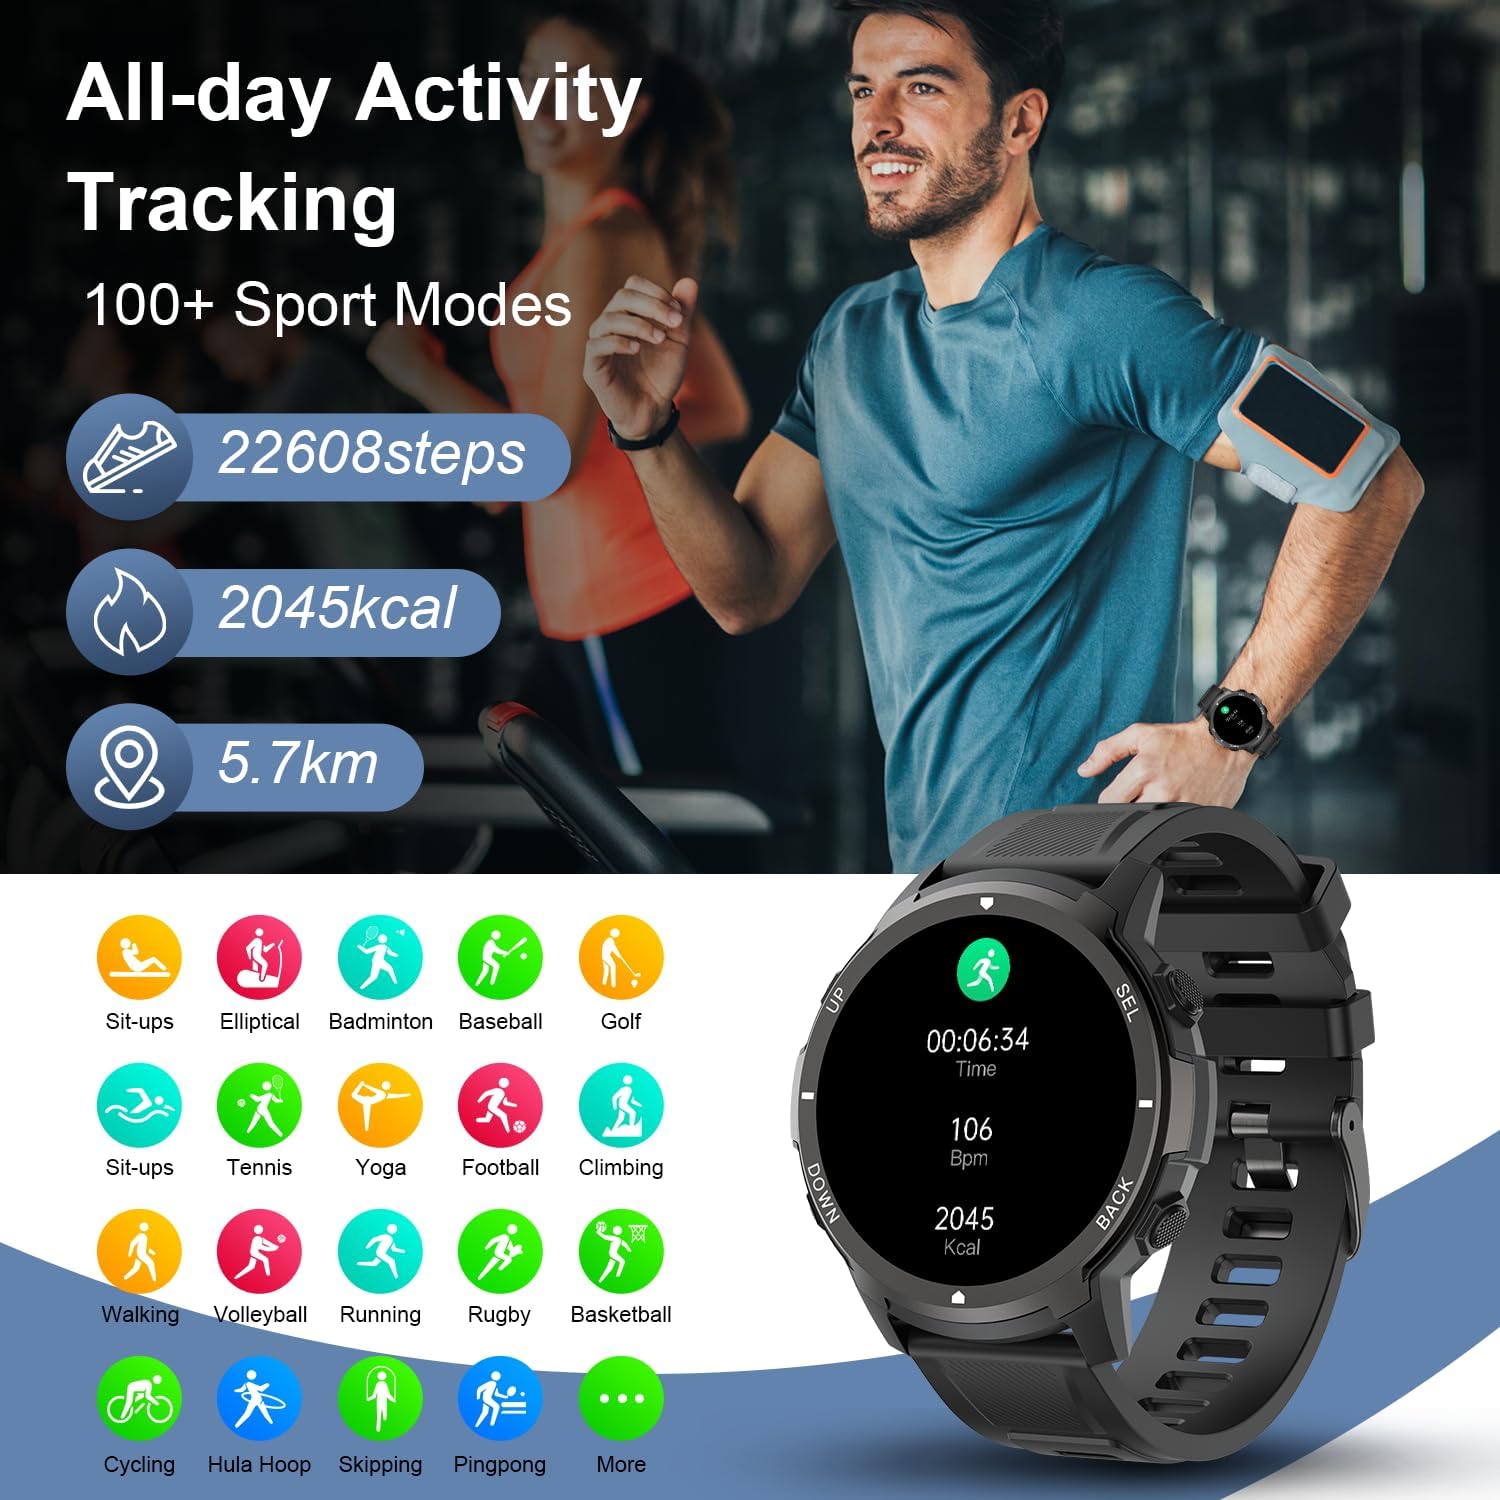 Basznrty Smart Watch for Men Fitness: (Make/Answer Call) Bluetooth Military Smartwatch for Android iPhone Phones Waterproof Outdoor Tactical Digital Sport Run Watches Tracker Sleep Heart Rate Monitor